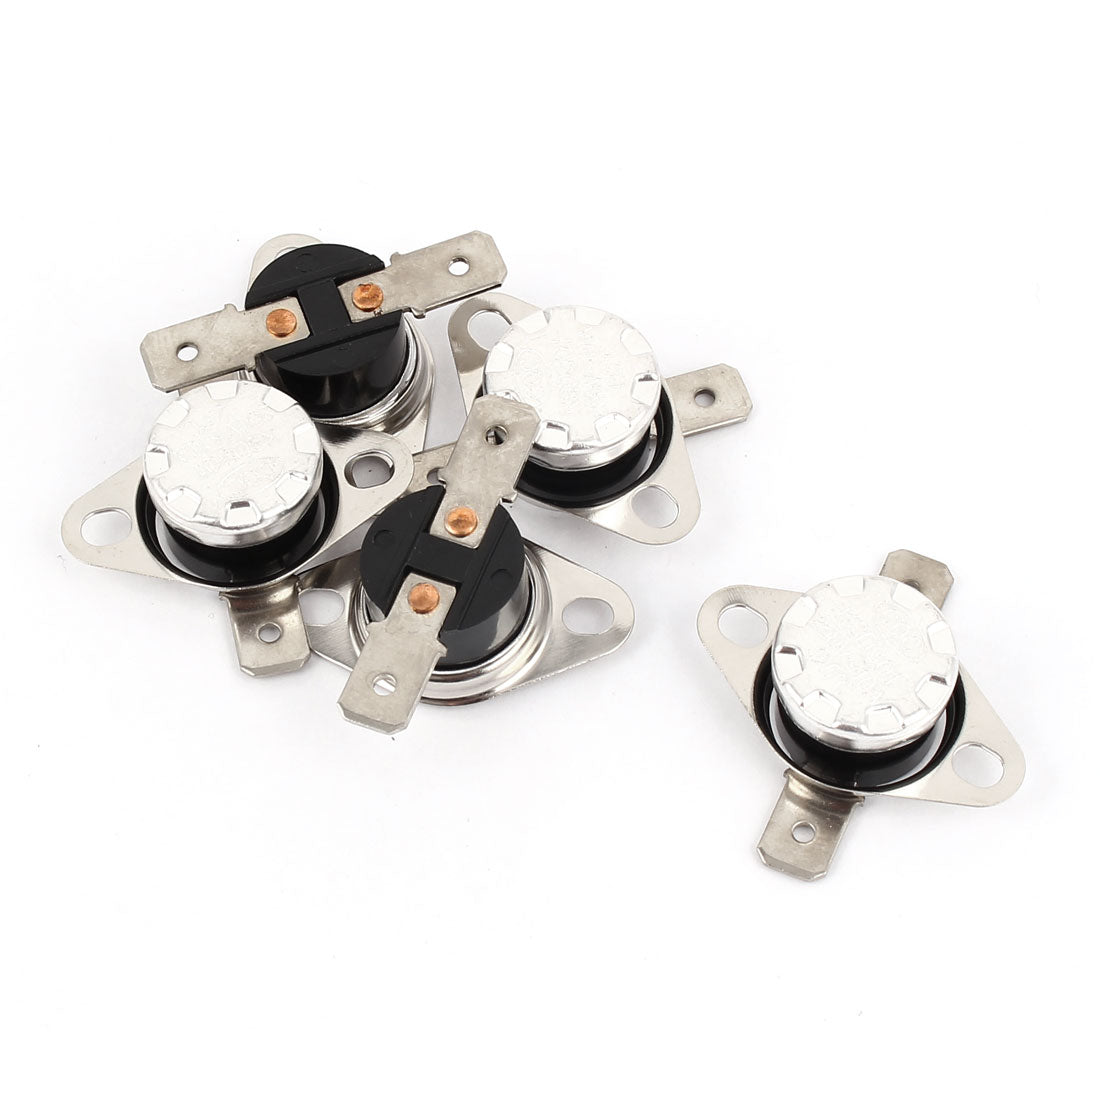 uxcell Uxcell 5 Pcs AC 250V 10A KSD301 NO 125 Celcius Degree Temperature Switch Thermostat